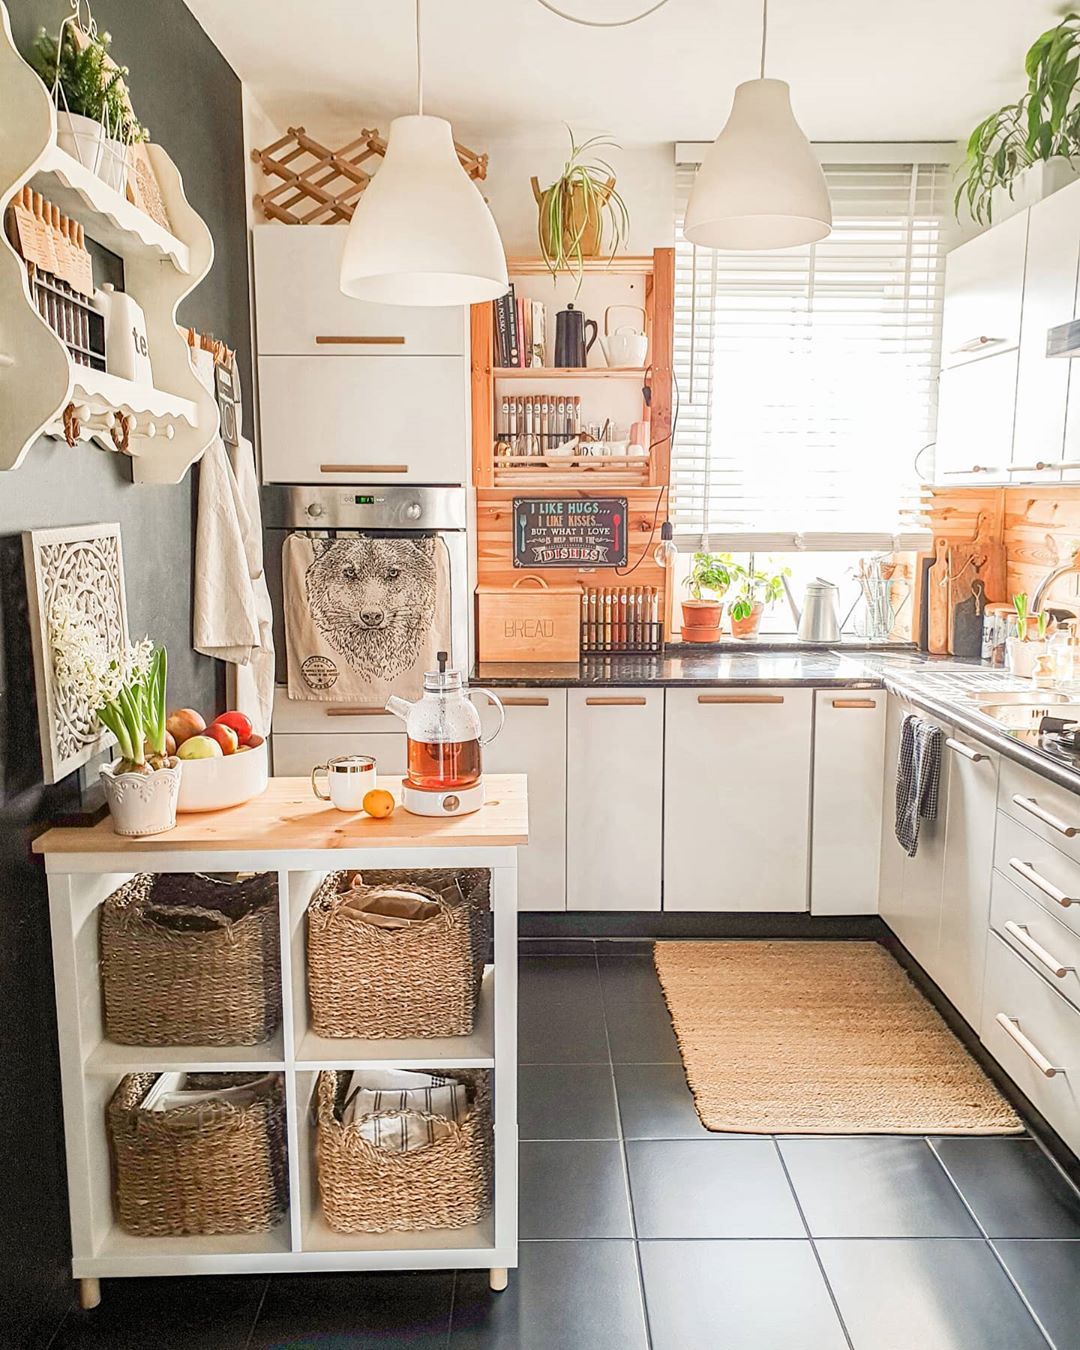 Excelent ikea small kitchen design ideas Ikea Small Kitchen 9 Clever Hacks That Ll Help You Make The Most Of Your Tiny Decor Object Daily Dose Best Home Decorating Ideas Interior Design Inspiration